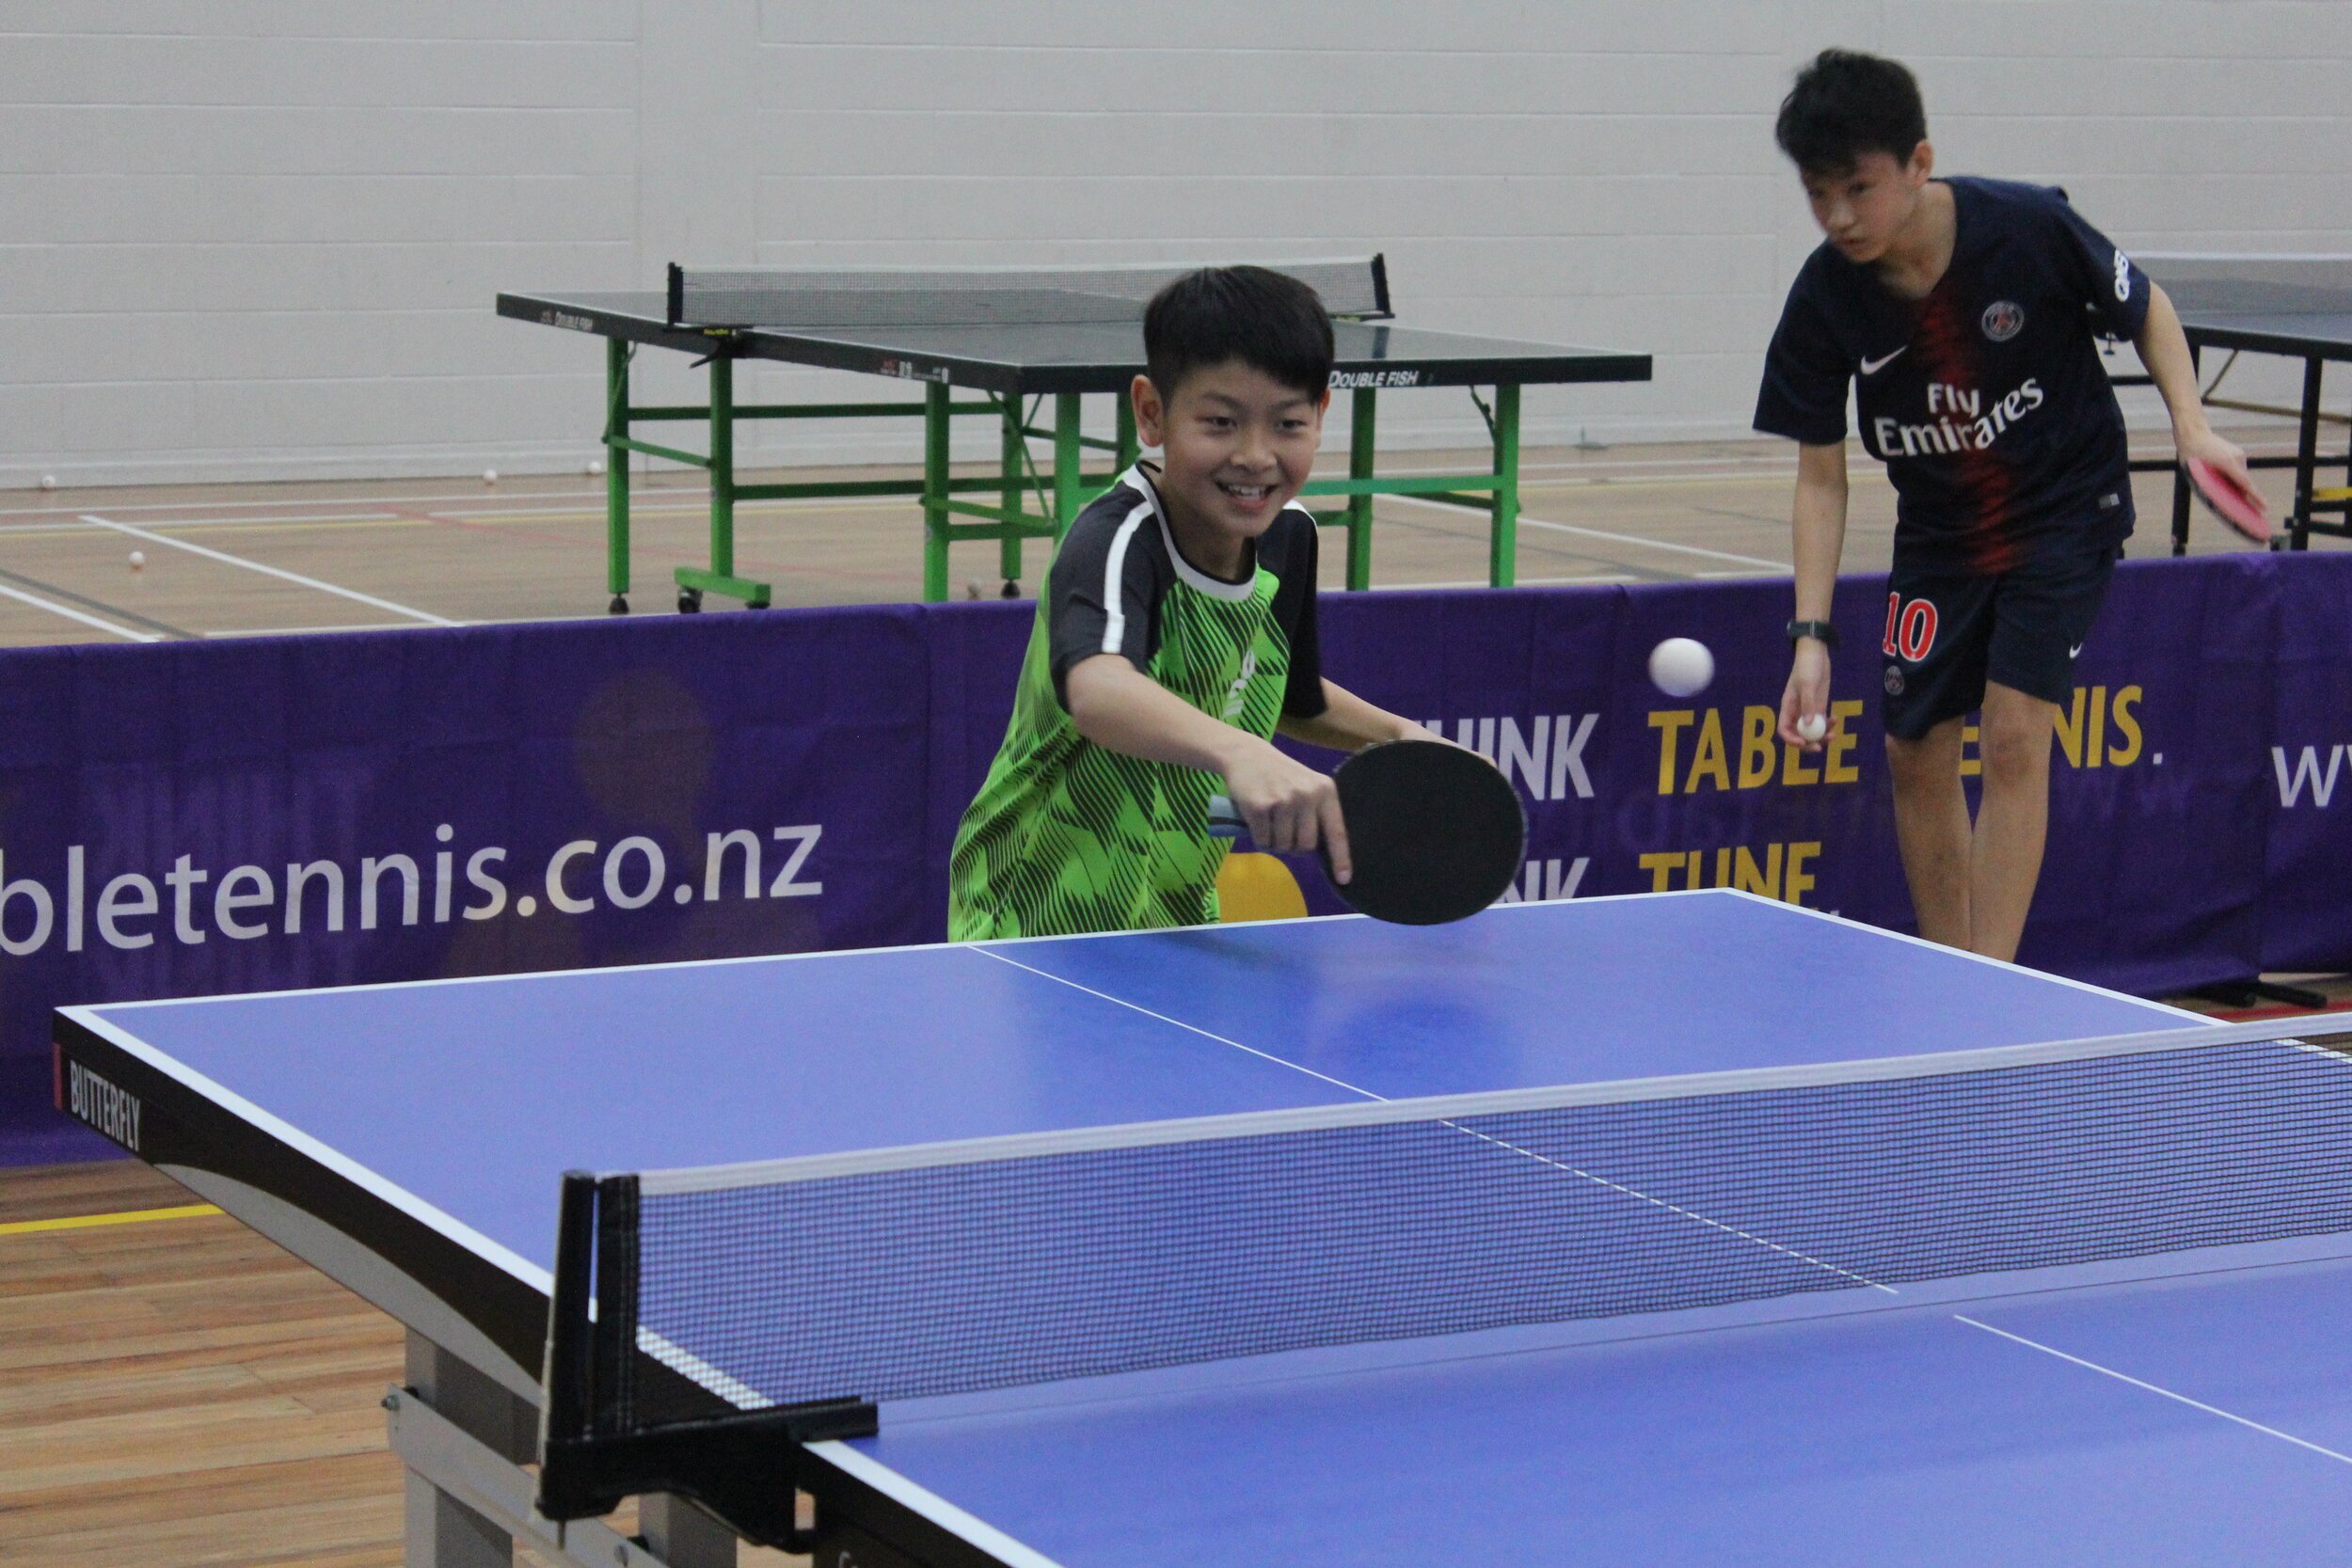 Local Table Tennis Club League Aims For Smashing Year TODAY